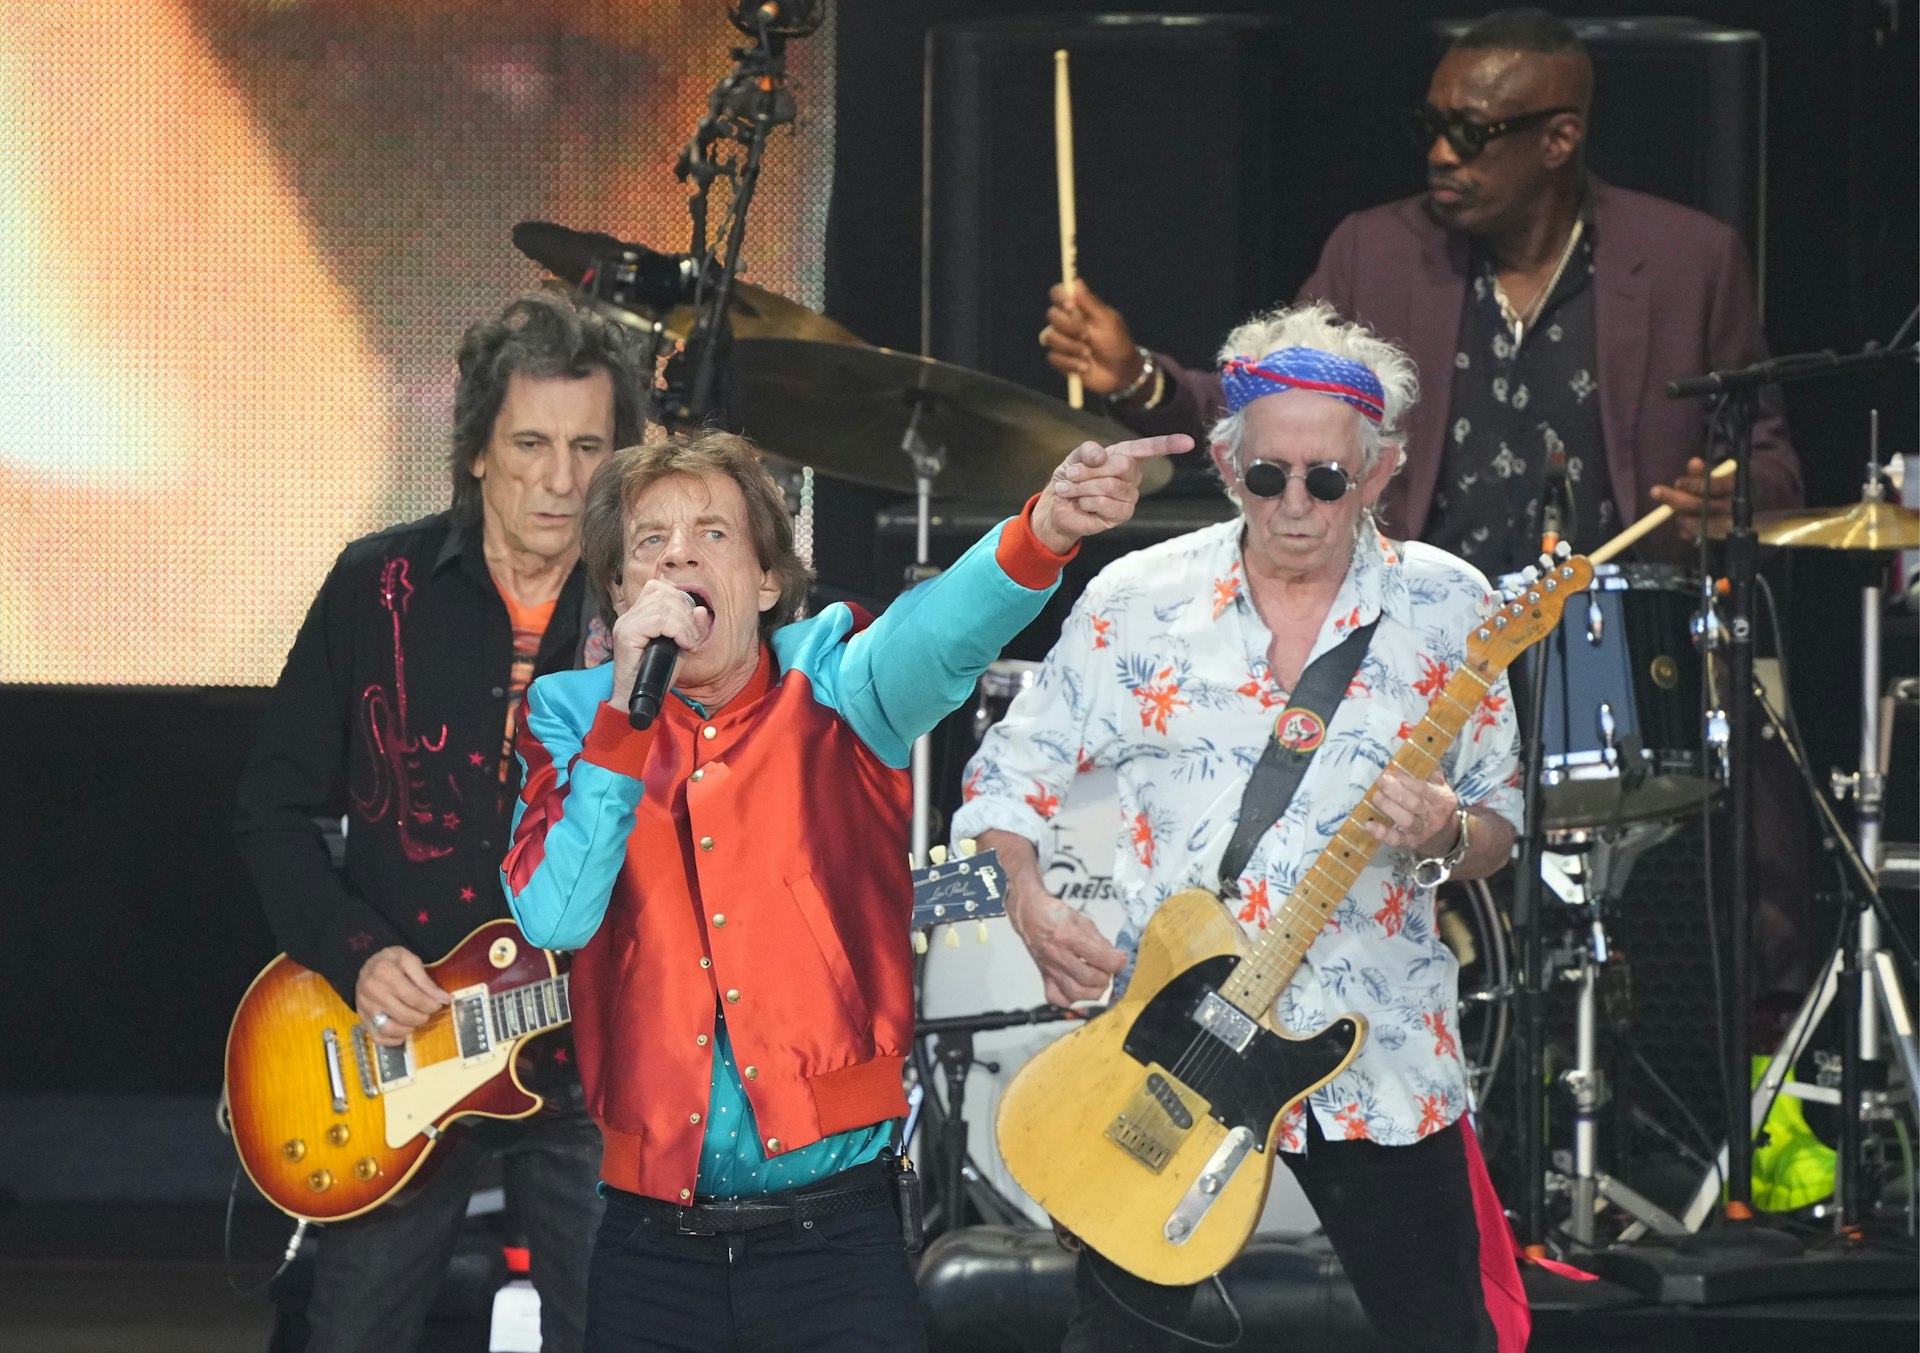 Ronnie Wood, Mick Jagger and Keith Richards of the Rolling Stones perform in Berlin, Germany